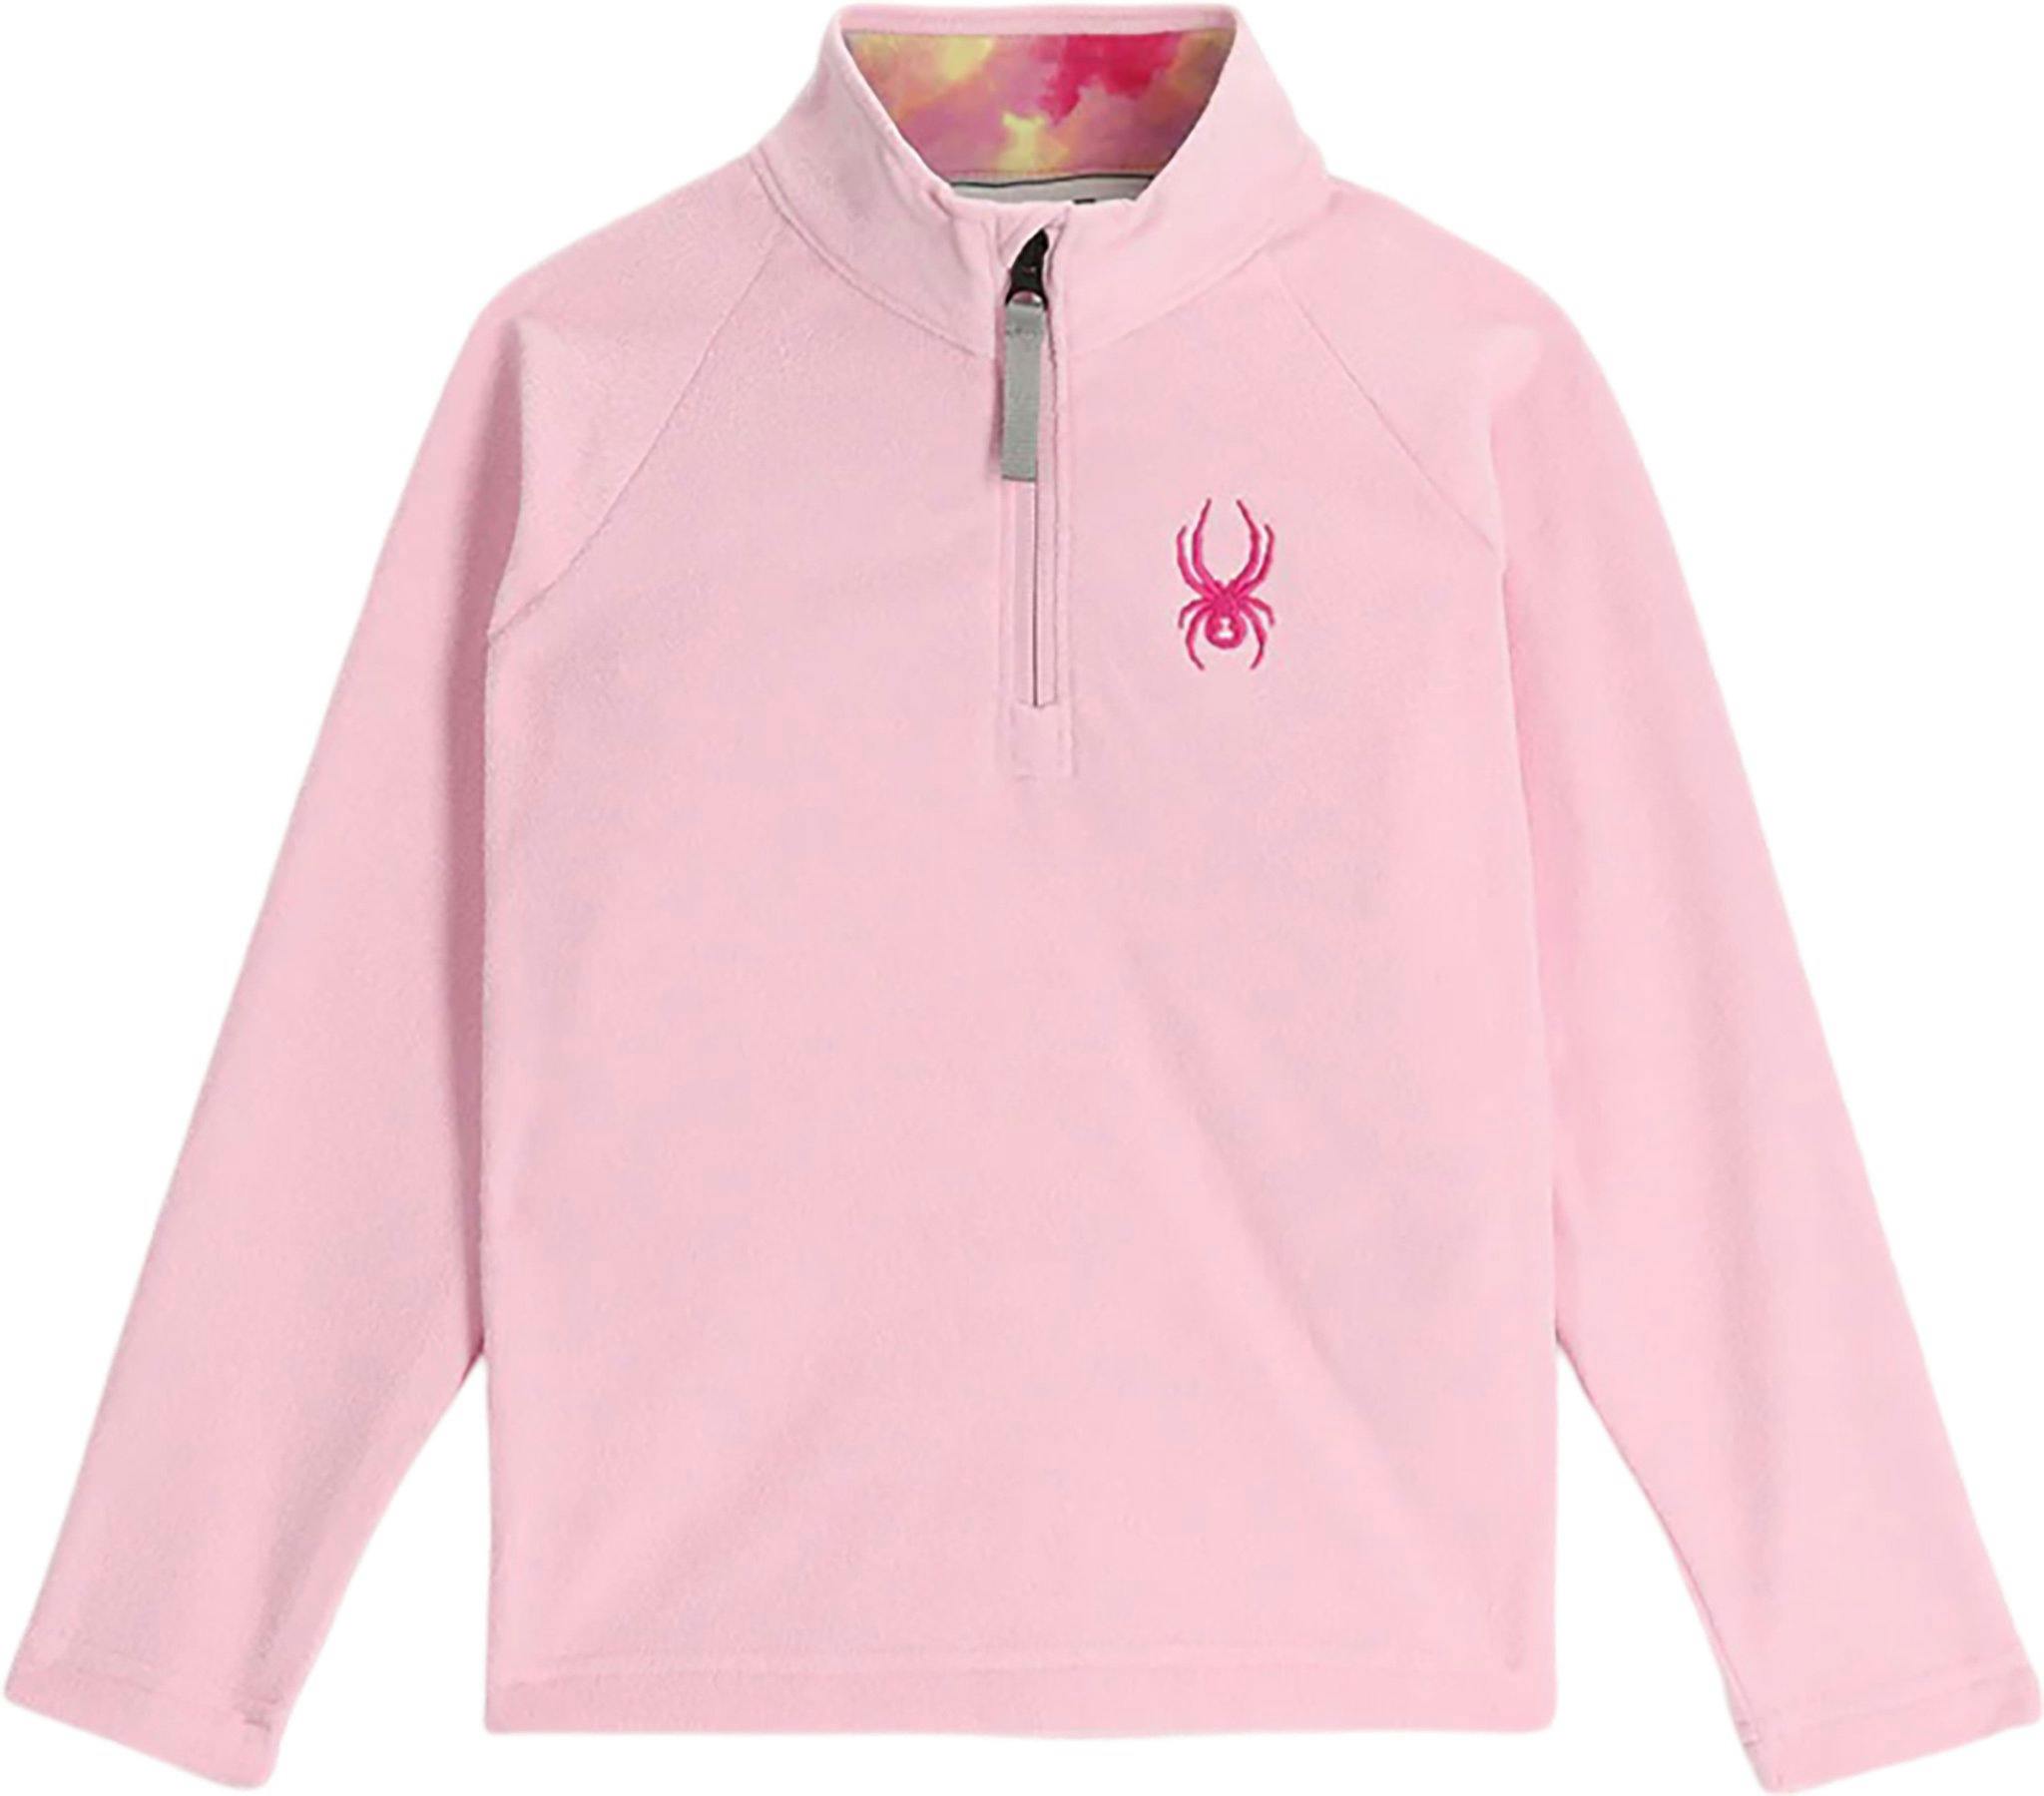 Product image for Speed Fleece 1/2 Zip Pullover - Toddlers